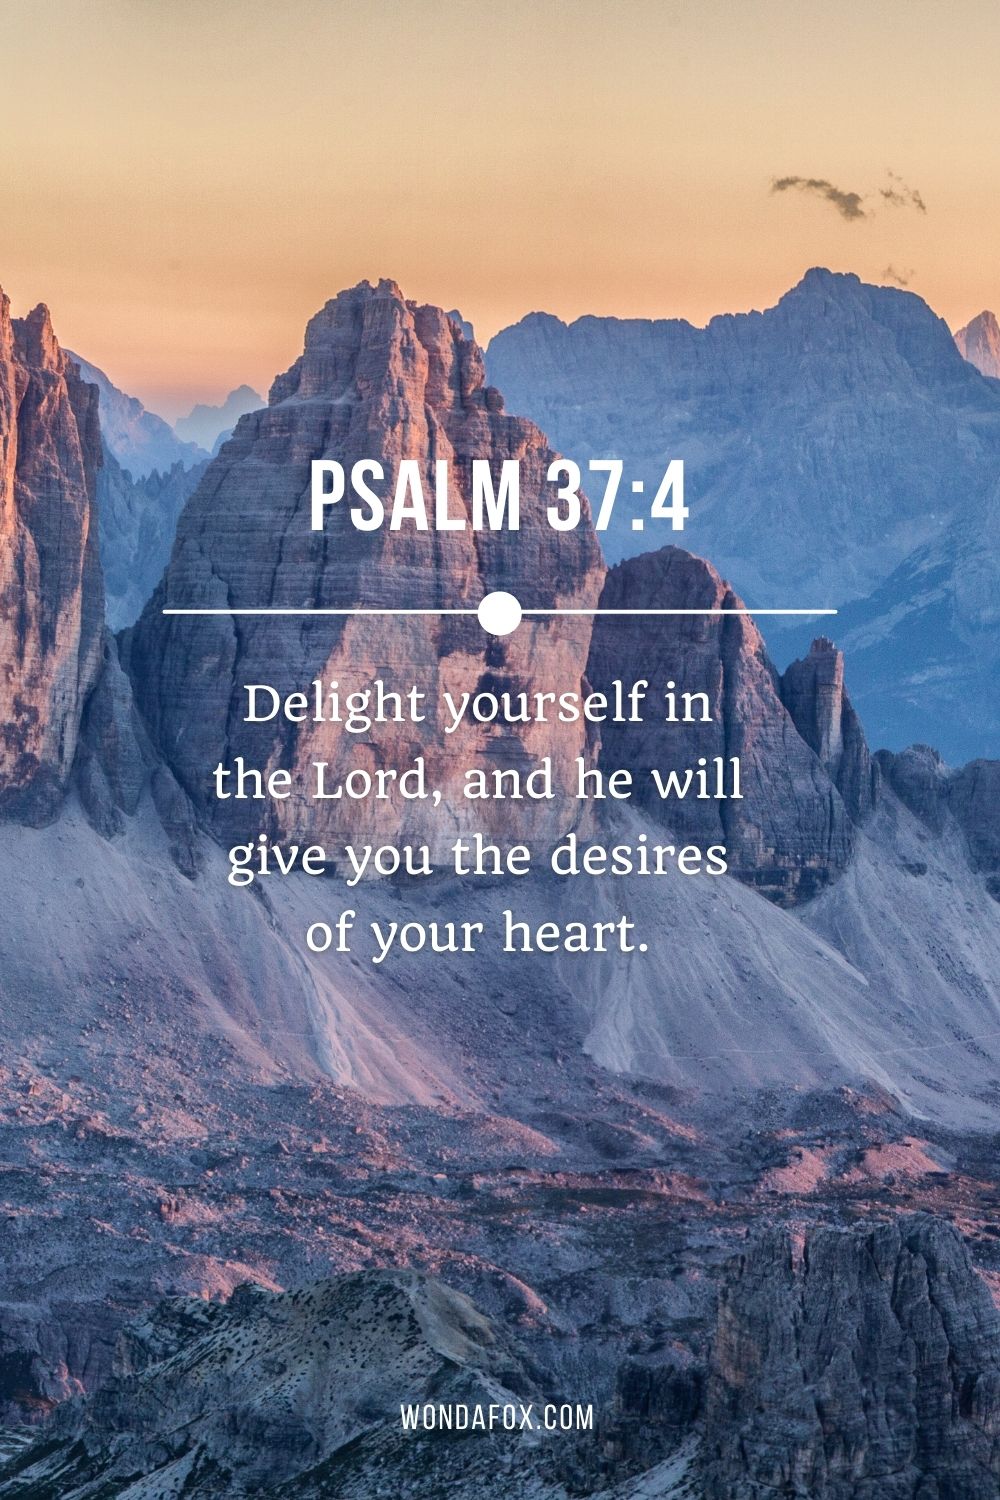 Delight yourself in the Lord, and he will give you the desires of your heart.